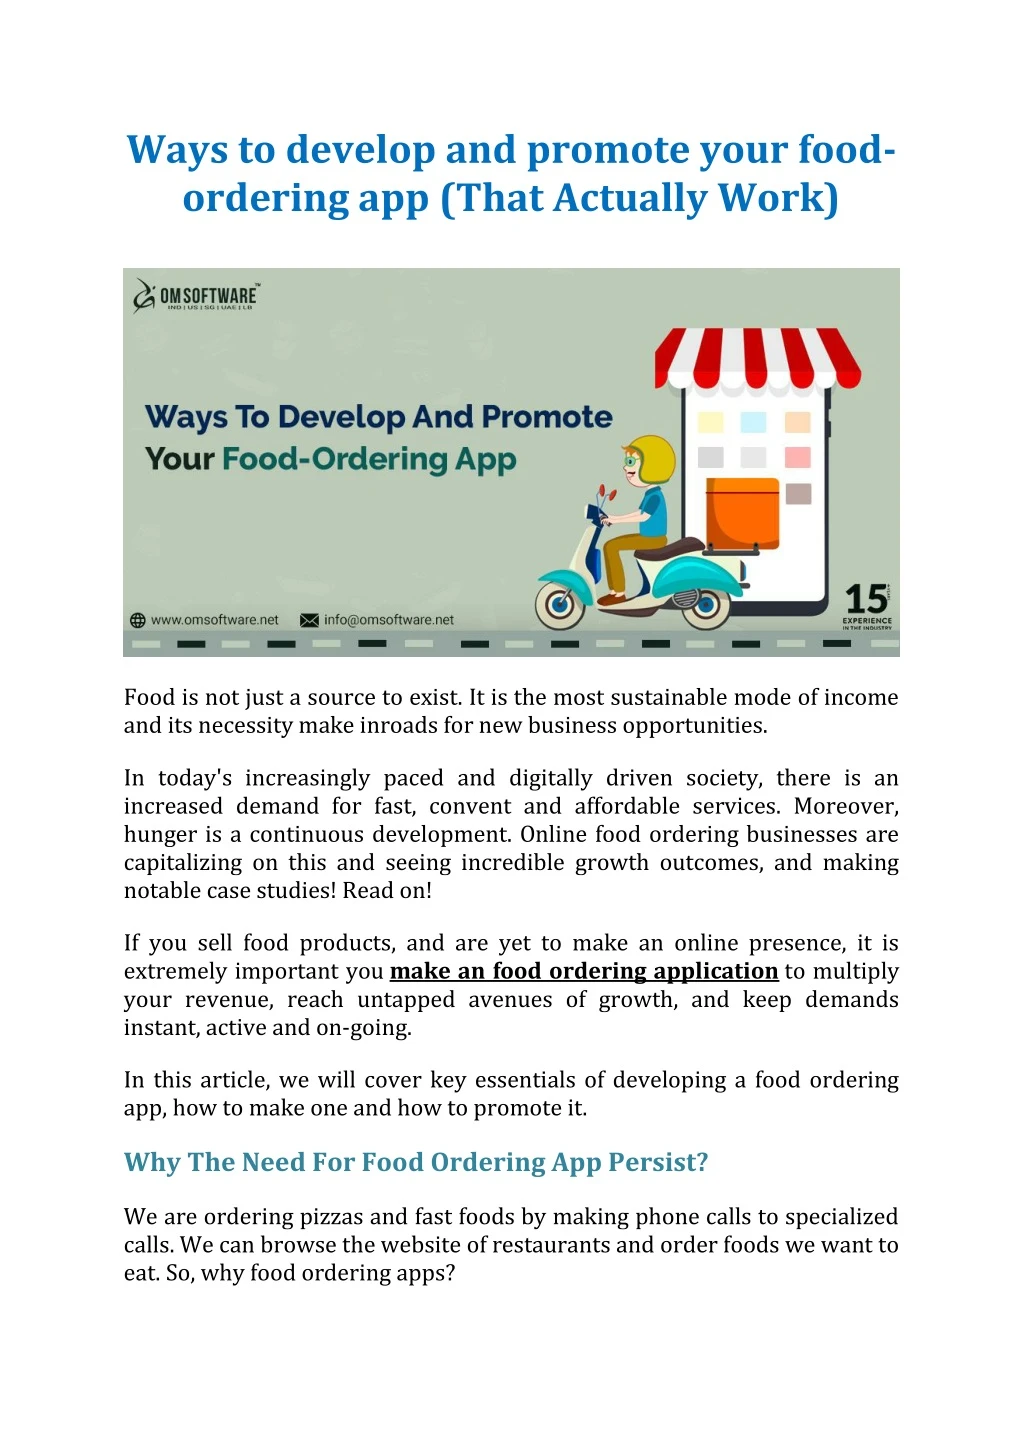 ways to develop and promote your food ordering